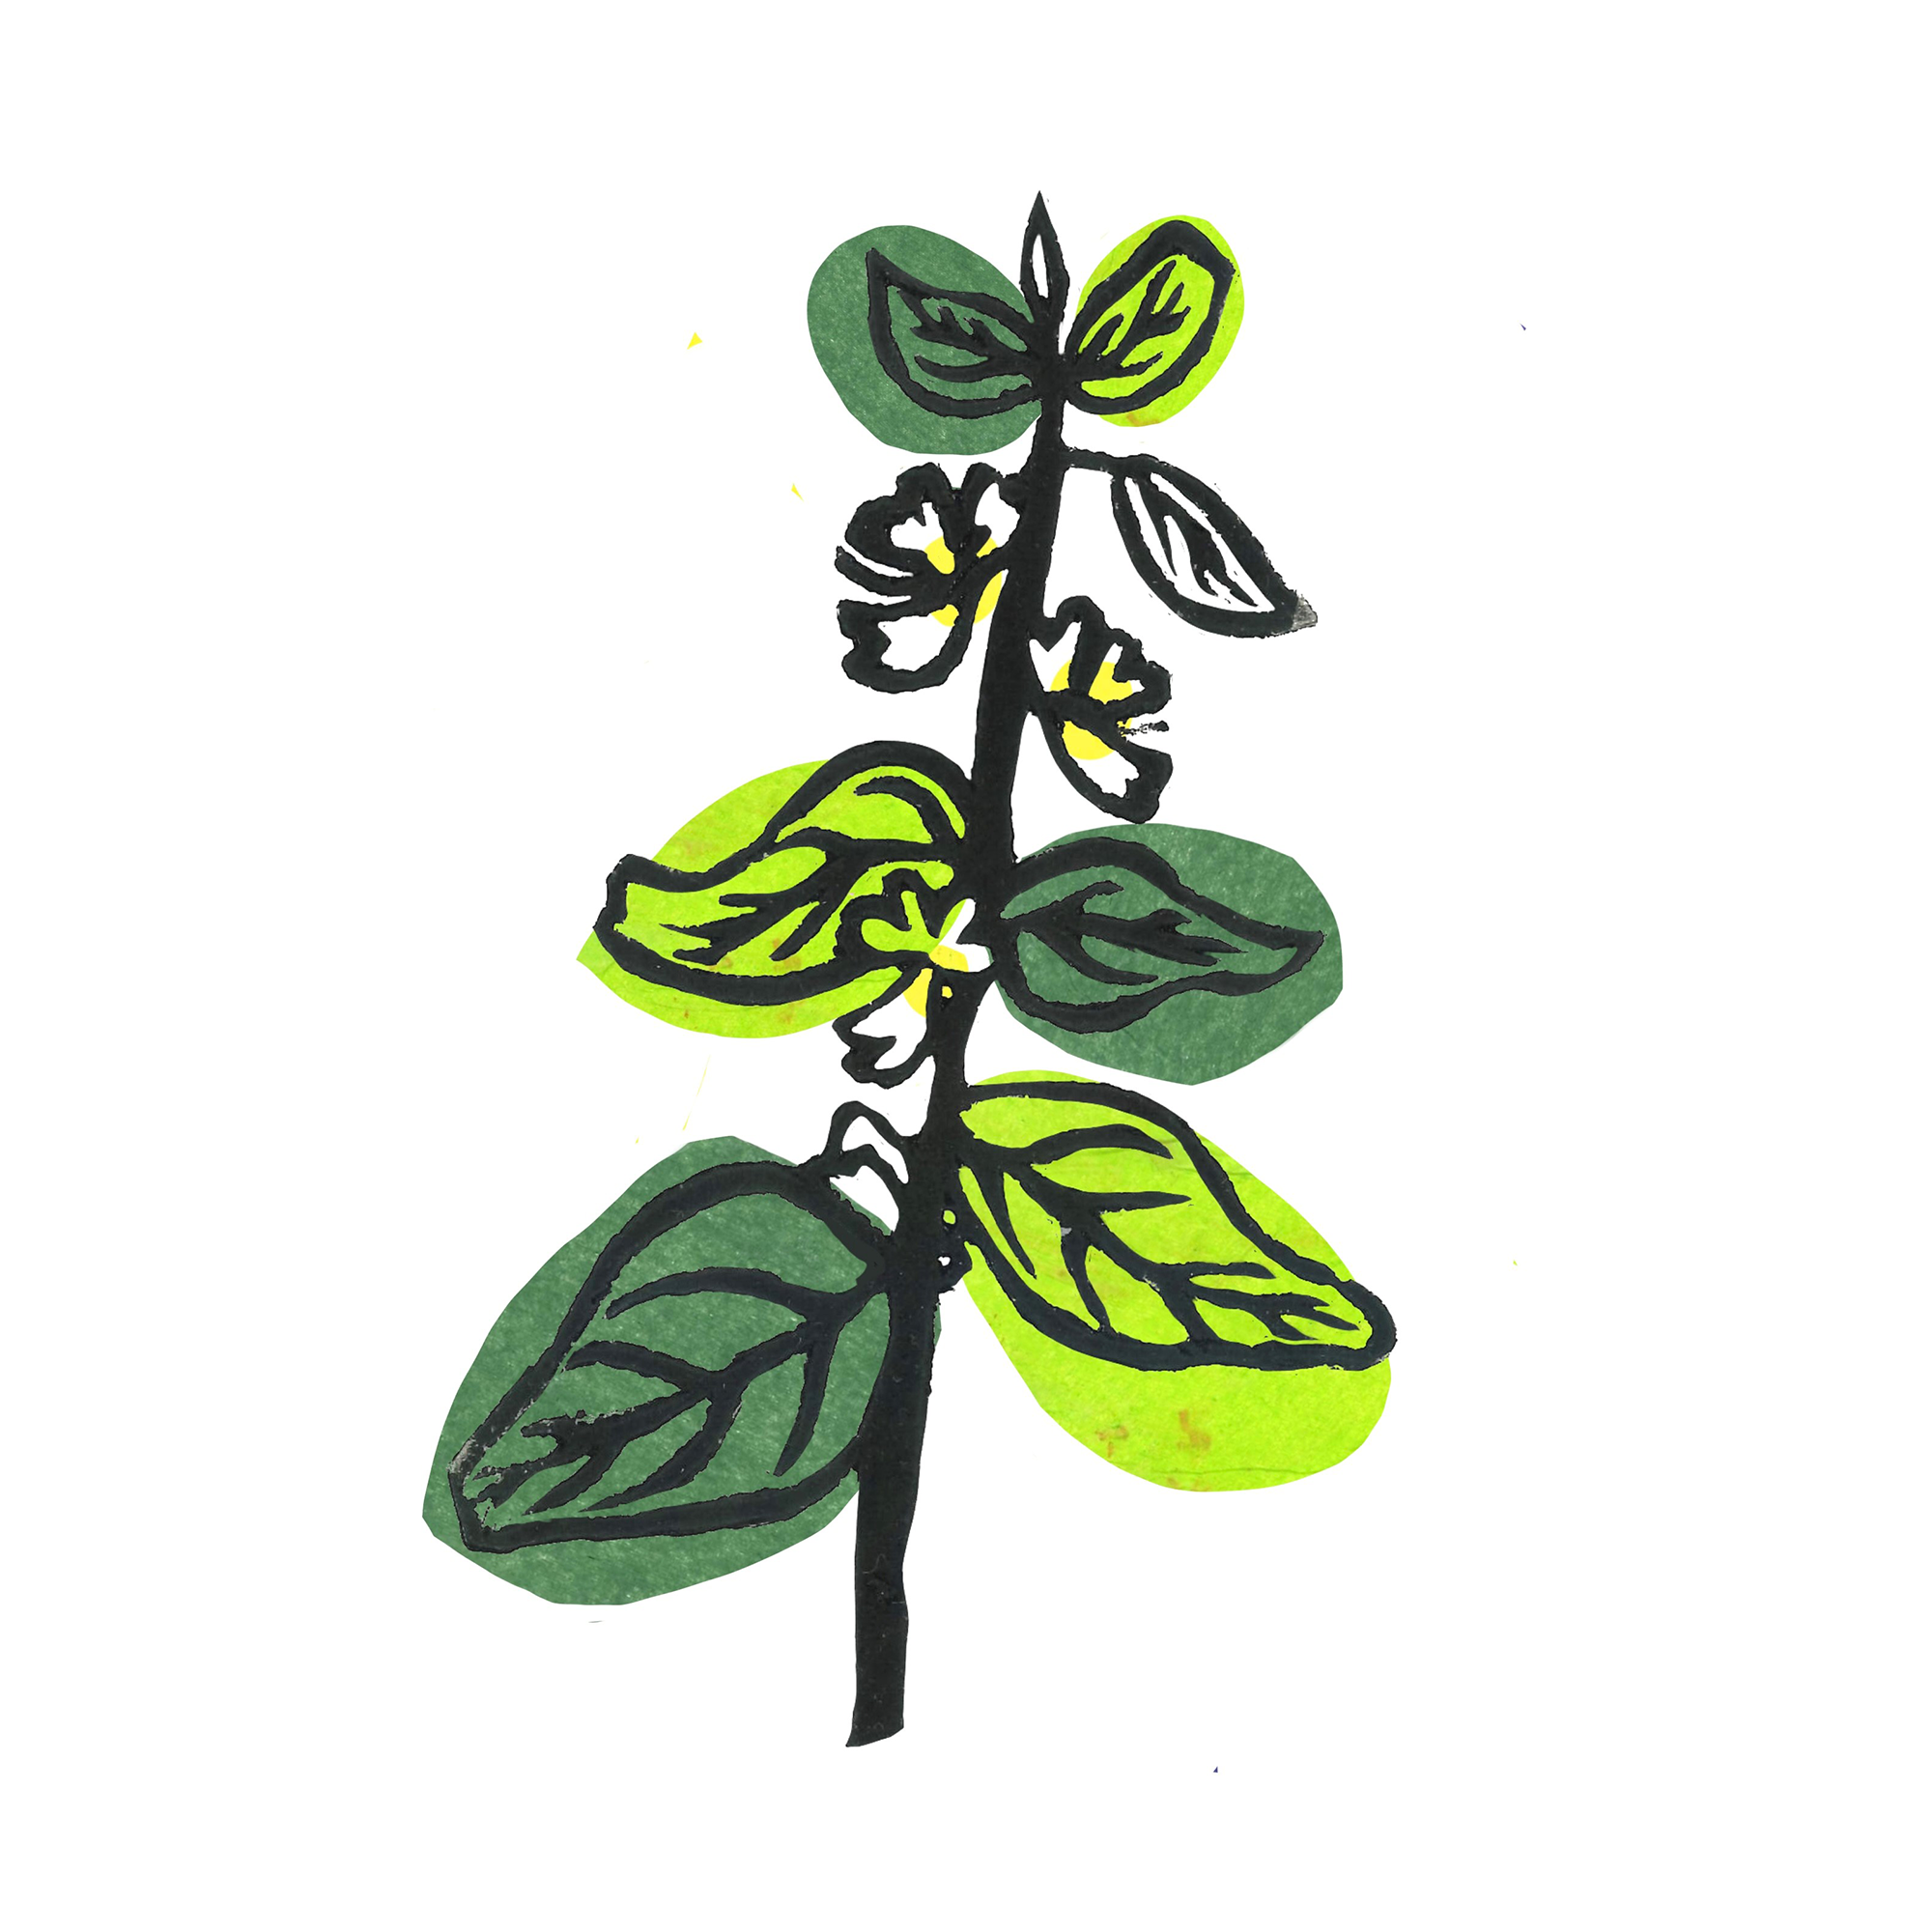 Lino print by Madison Powlesland showing a sprig of a basil plant and its flowers.